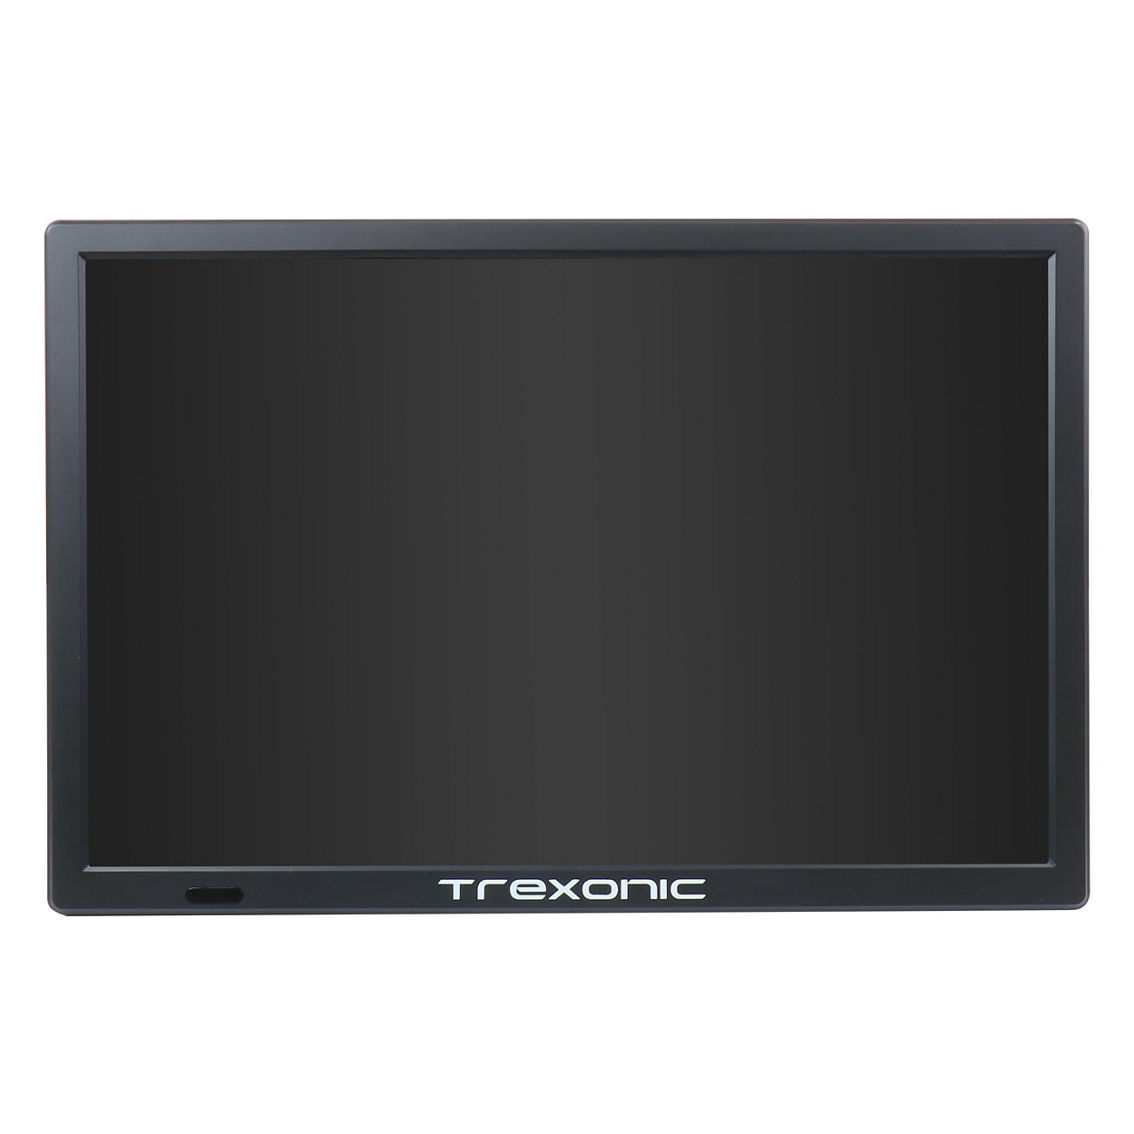 Trexonic Portable Rechargeable 15.4 Inch LED TV with HDMI, SD/MMC, USB, AV In/Ou - Image 2 of 5